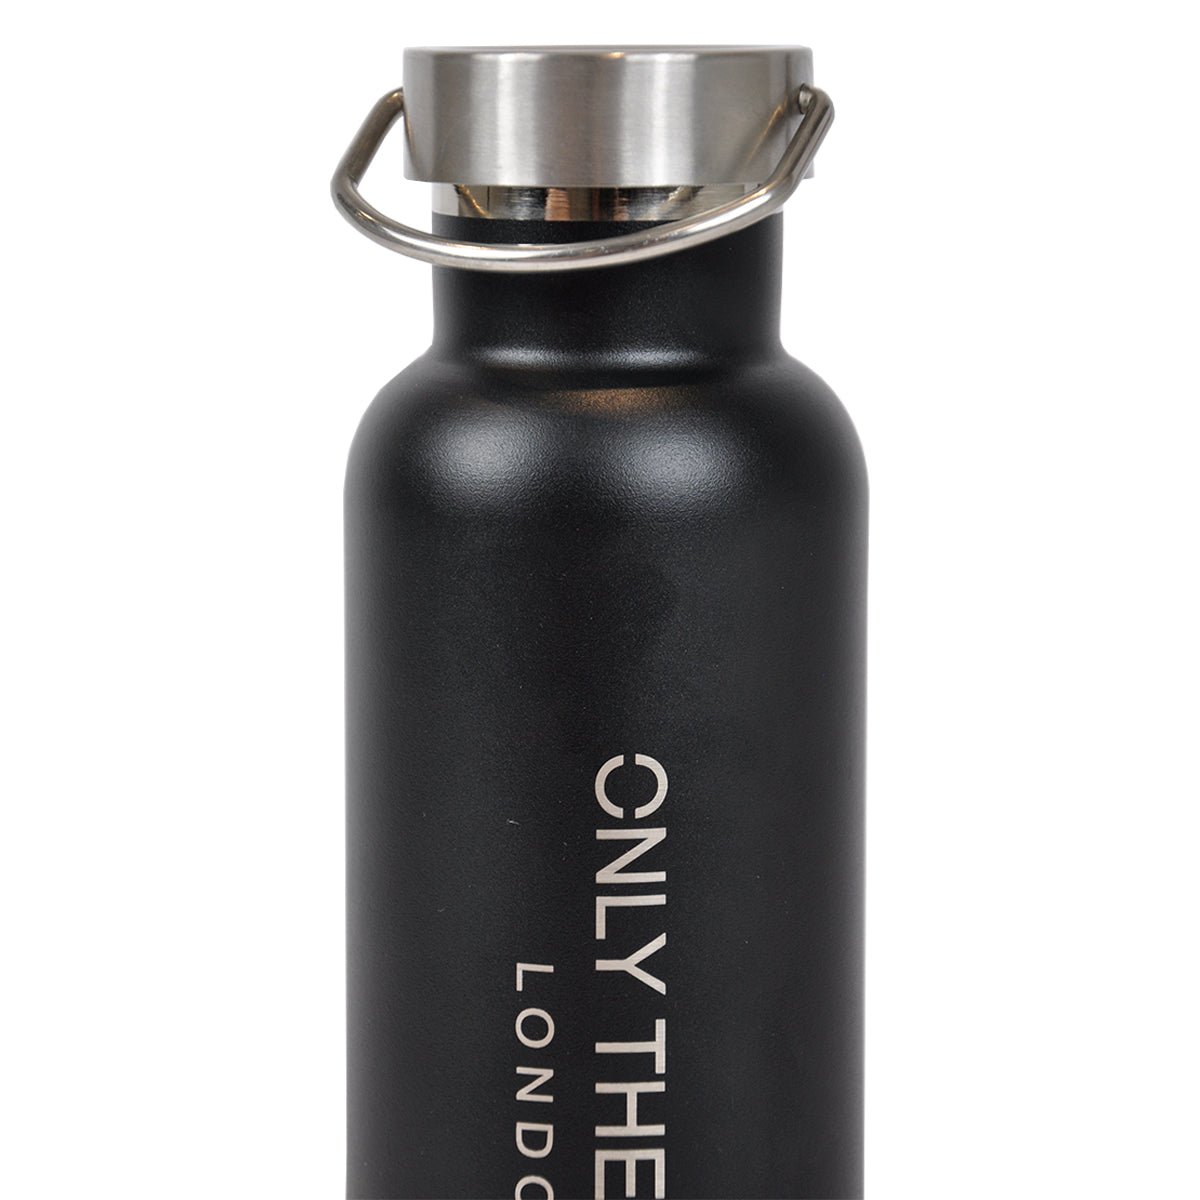 SIGNATURE STAINLESS STEEL FLASK